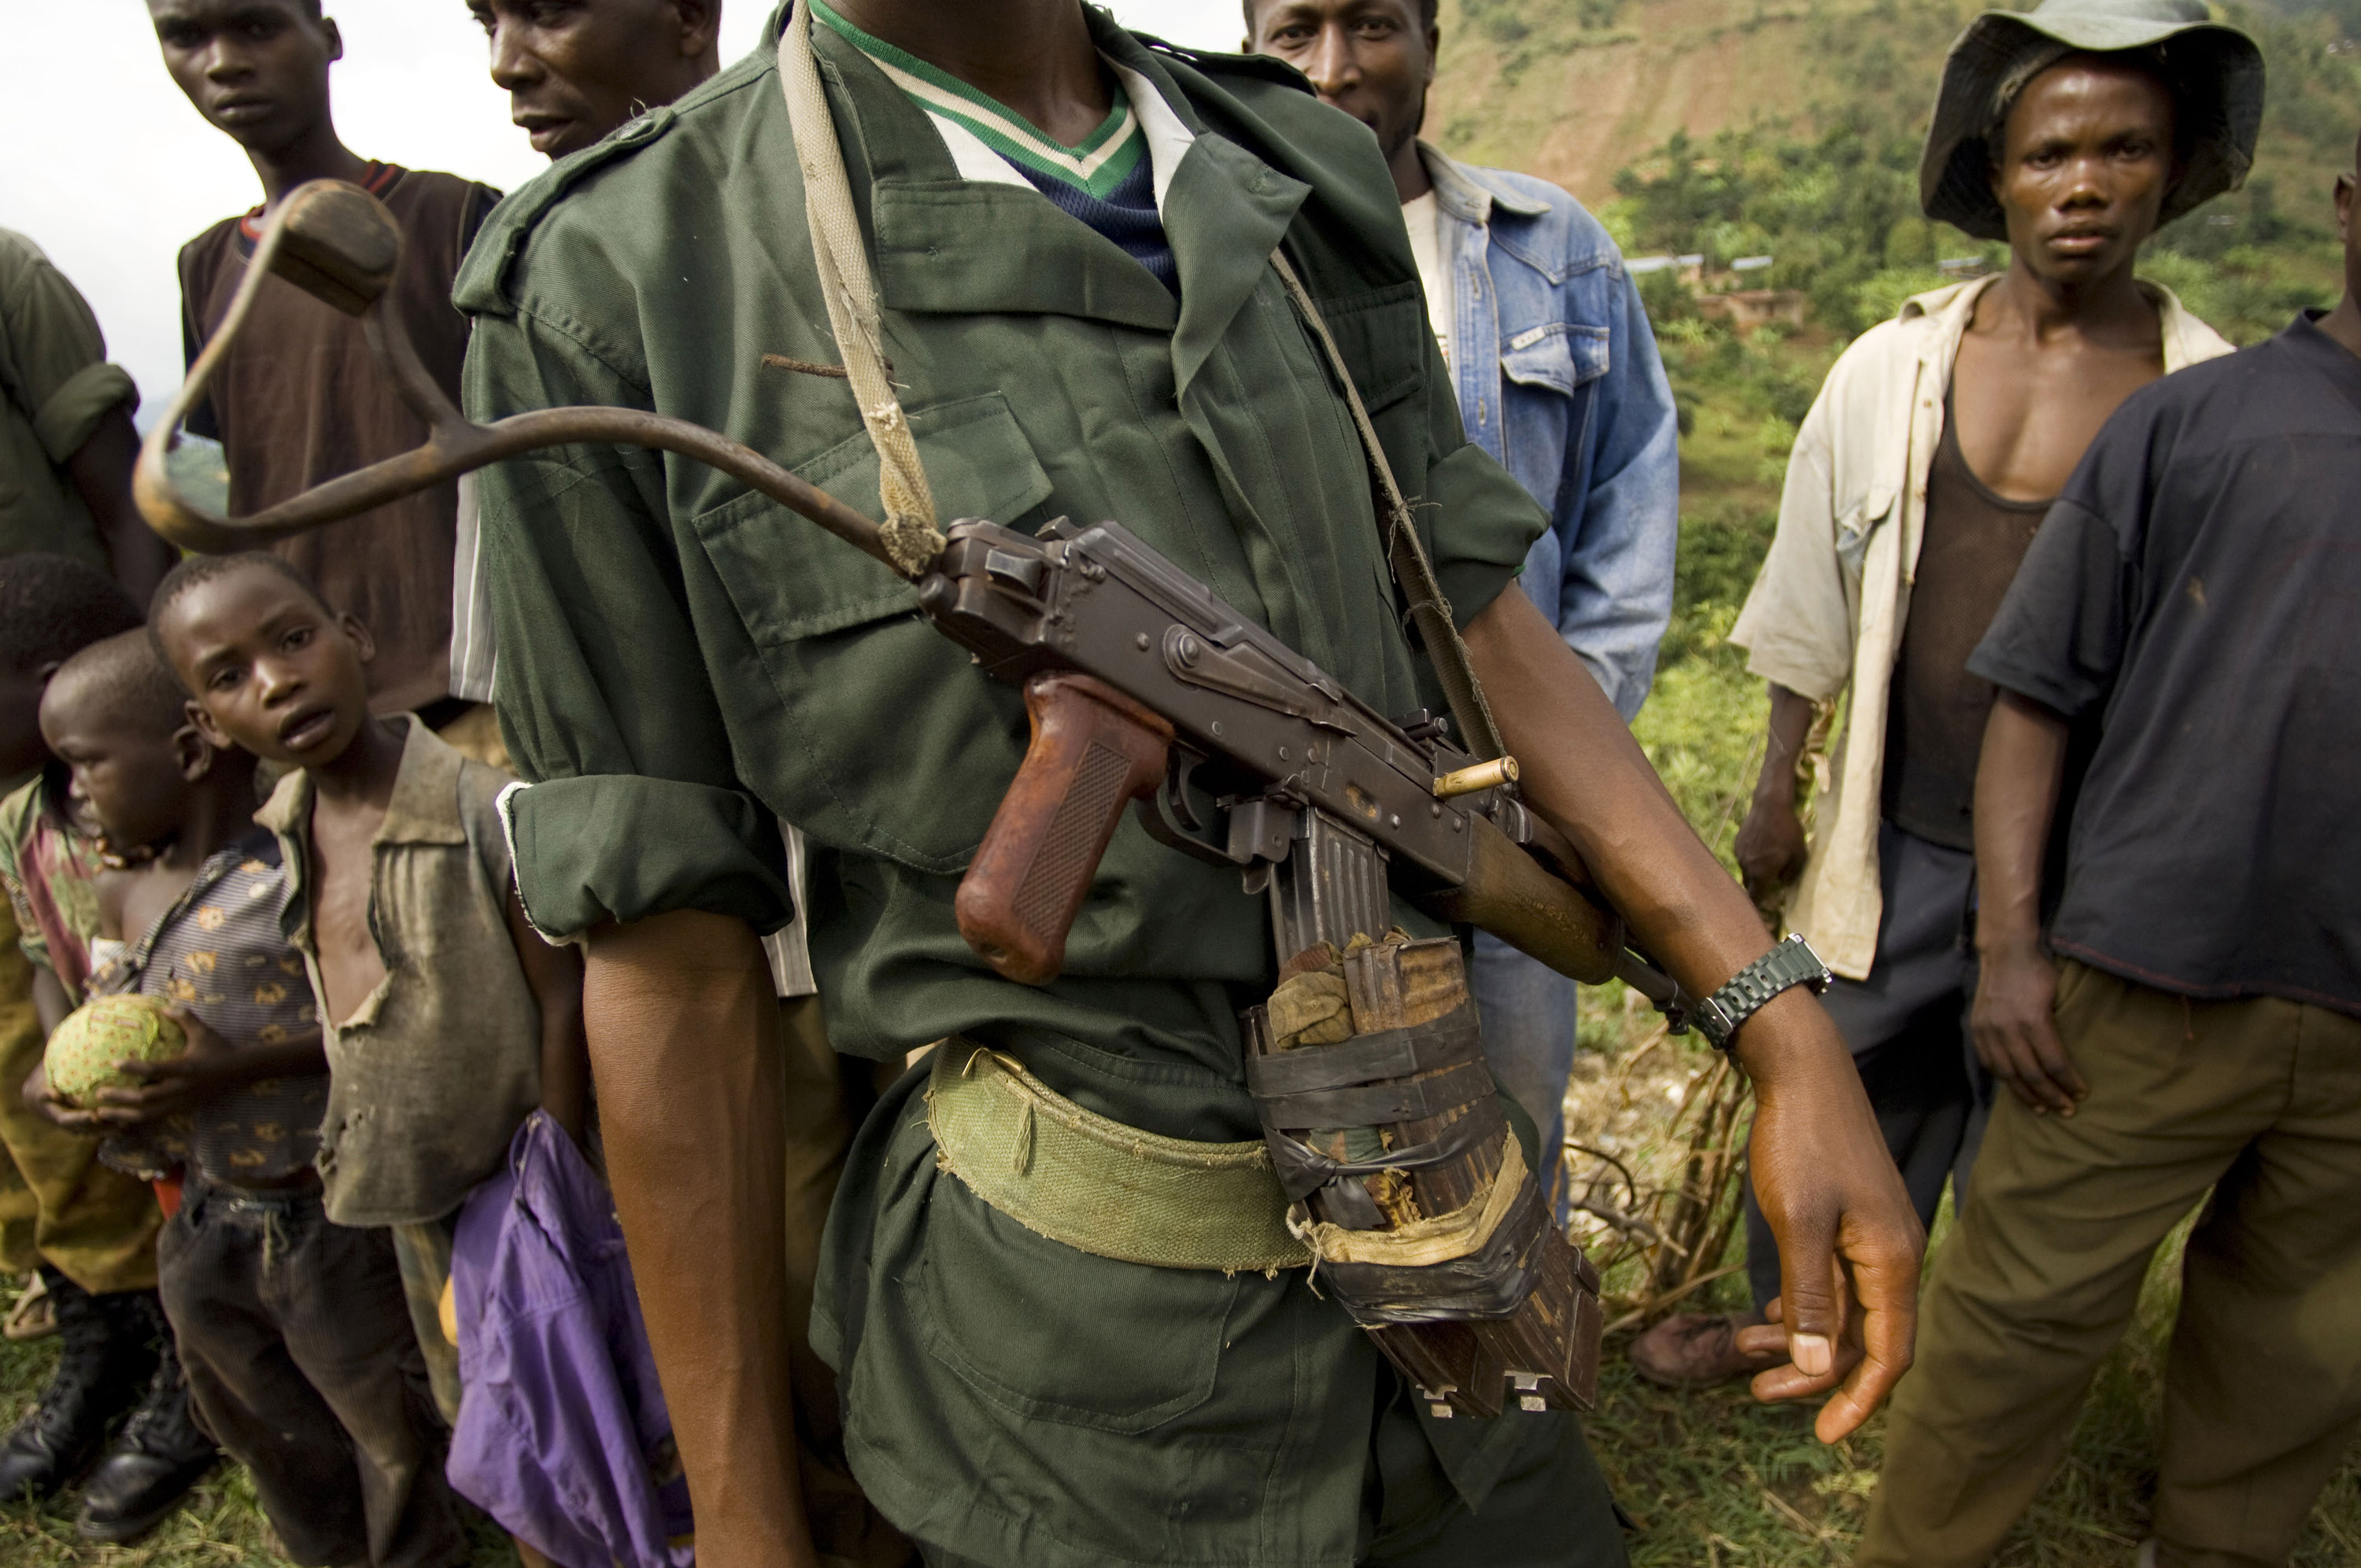 National Liberation Front rebels in the village of Ruyaga, Burundi in June 2008. After 15 years of off-again-on-again civil war, the last of Burundi's rebel groups has finally come to the negotiating table. A cease-fire signed in late May is still holding, and for the first time all the decision makers -- including top rebel leaders who until recently had been demonized as terrorists and commanded troops from exile -- are in the same place, here in the capital, Bujumbura.